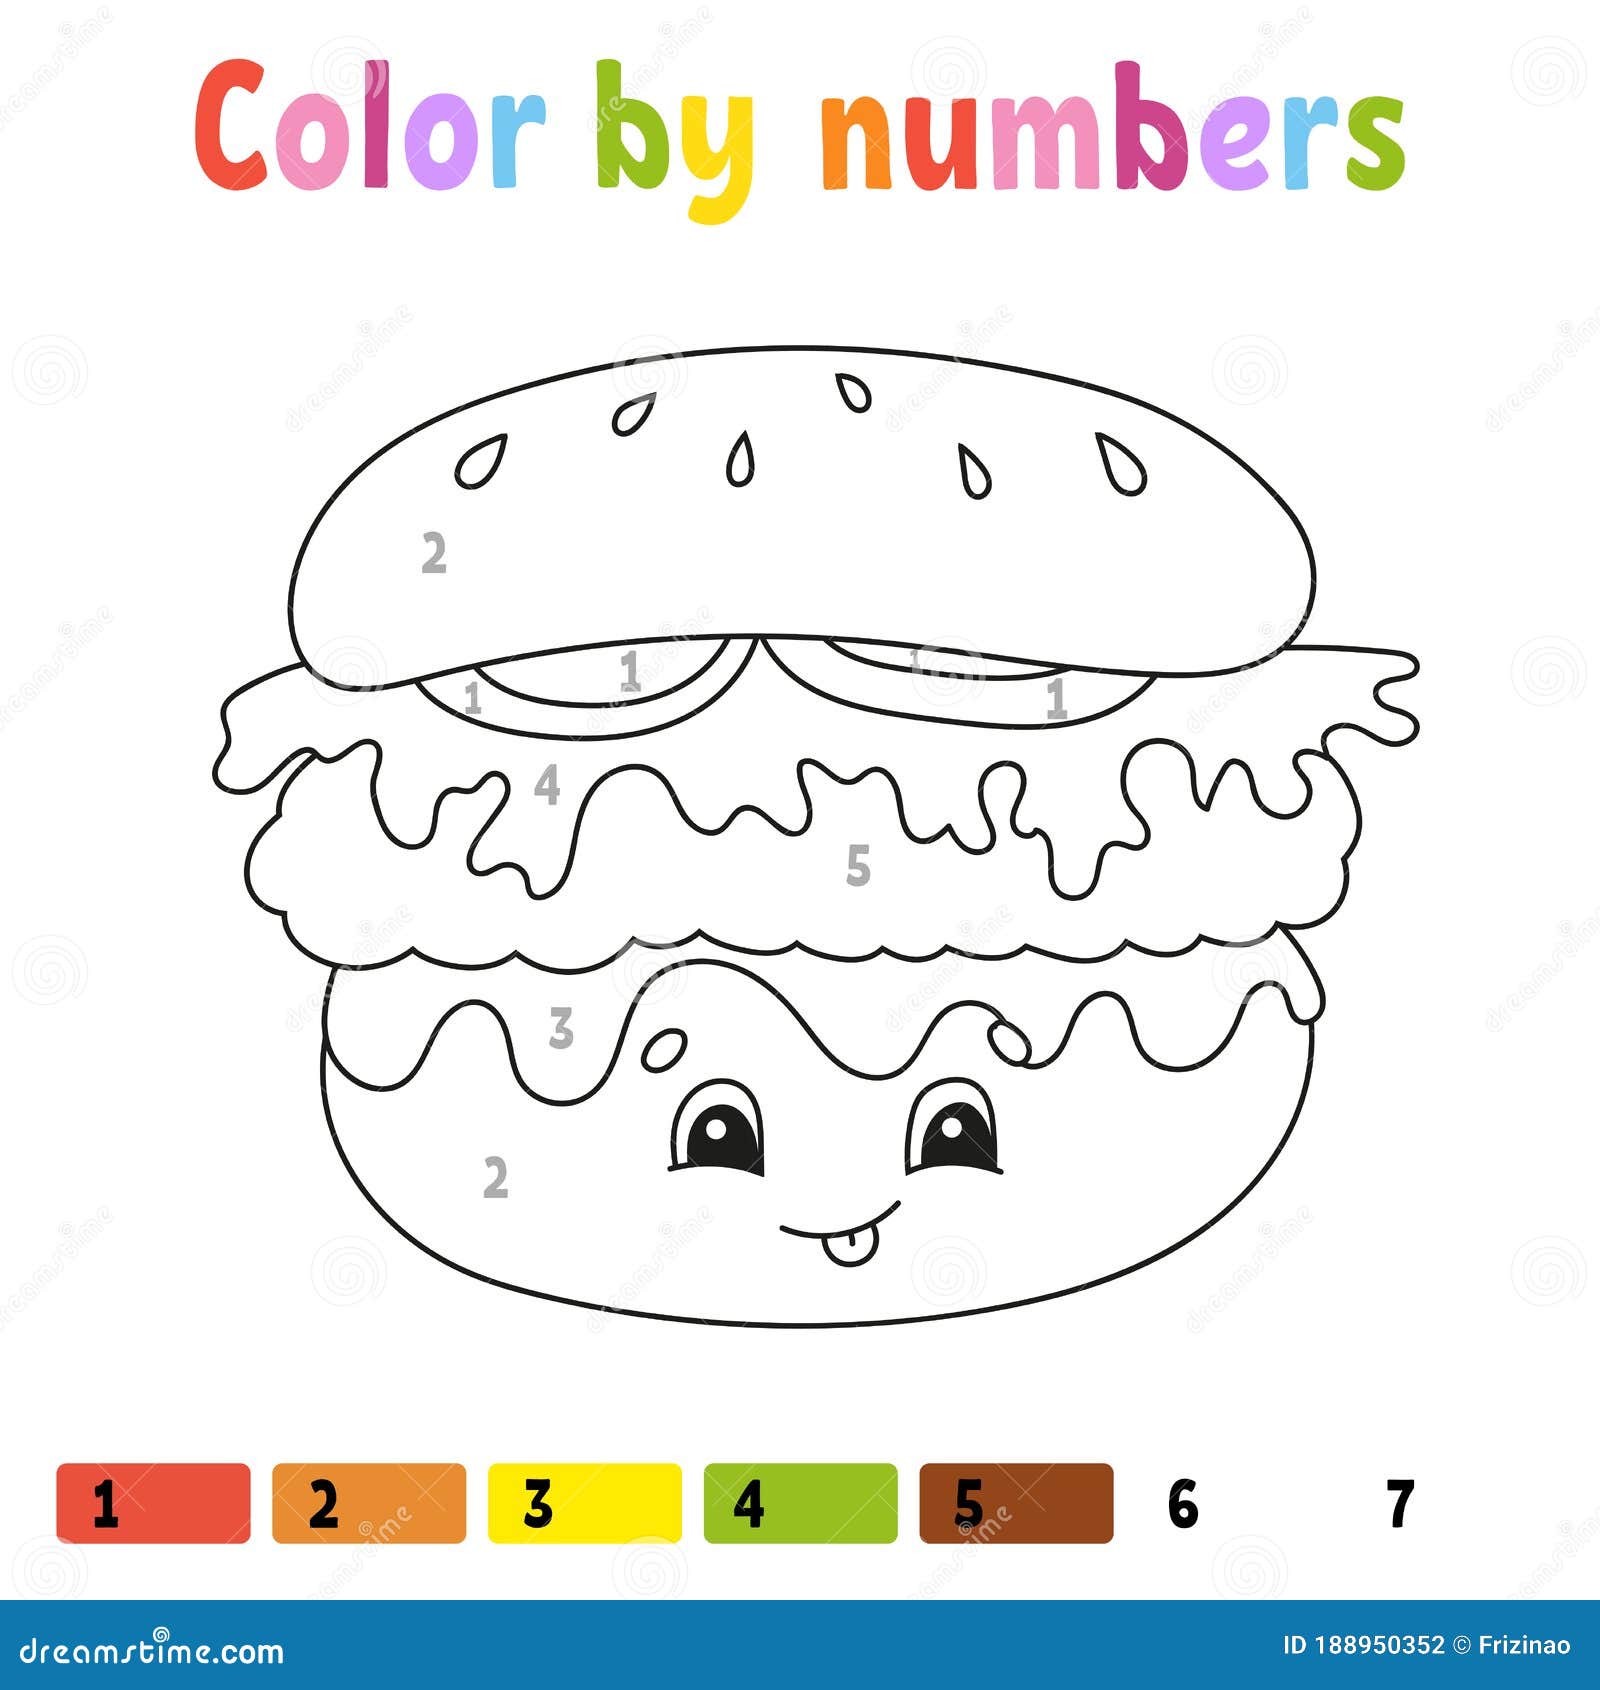 color-by-numbers-coloring-book-for-kids-vector-illustration-cartoon